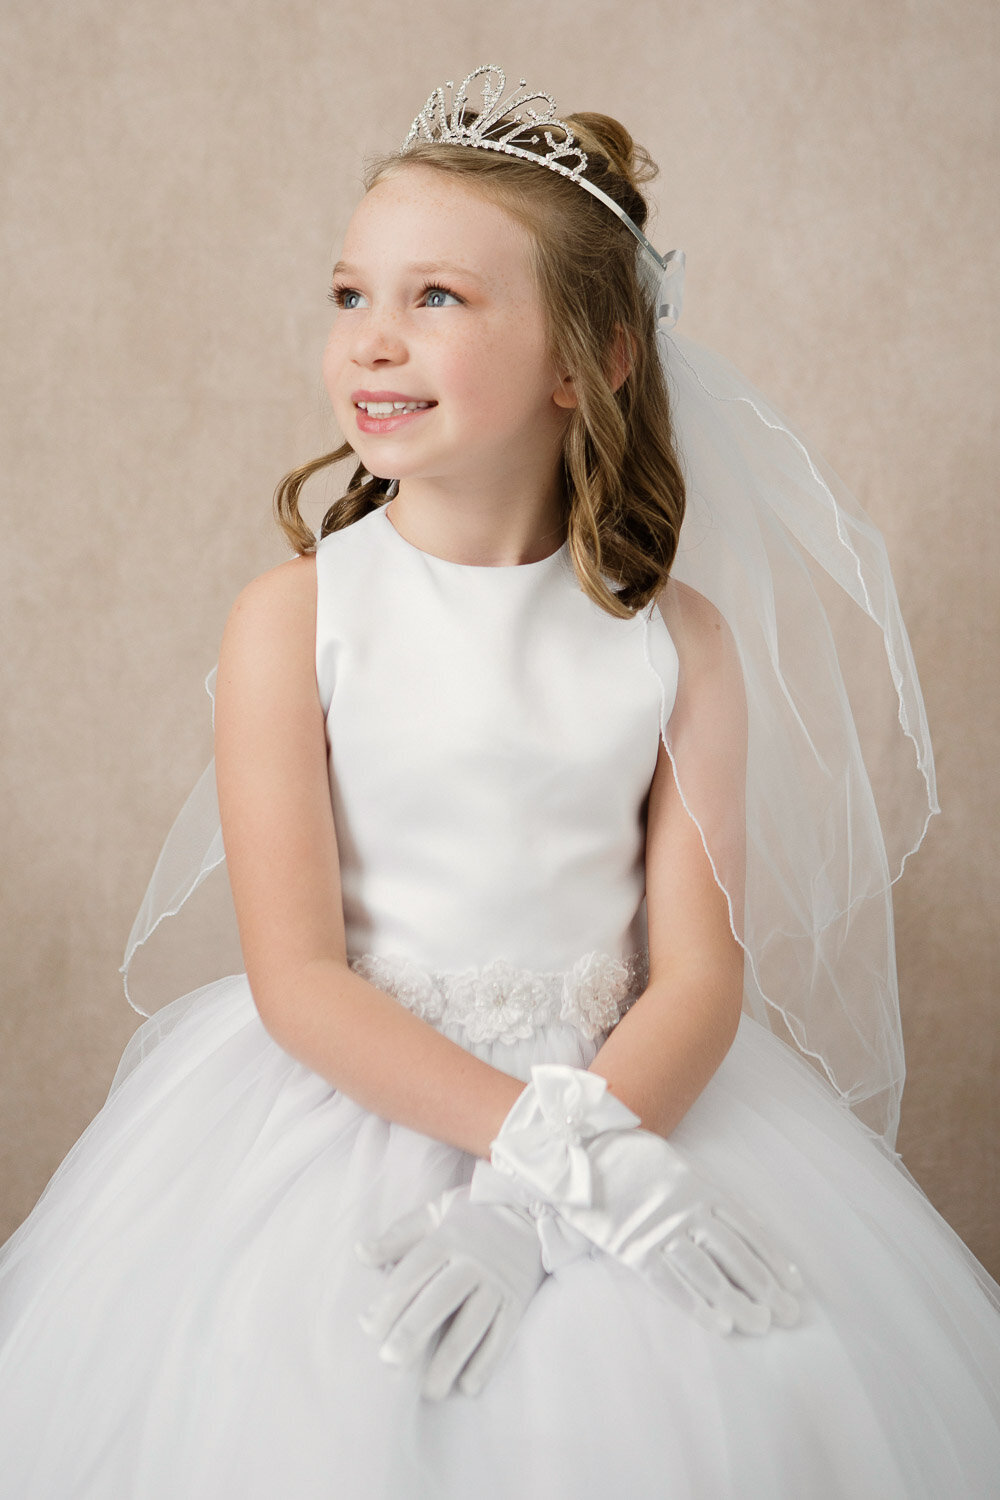 Professional little beauty portrait of girl in white dress and tiara